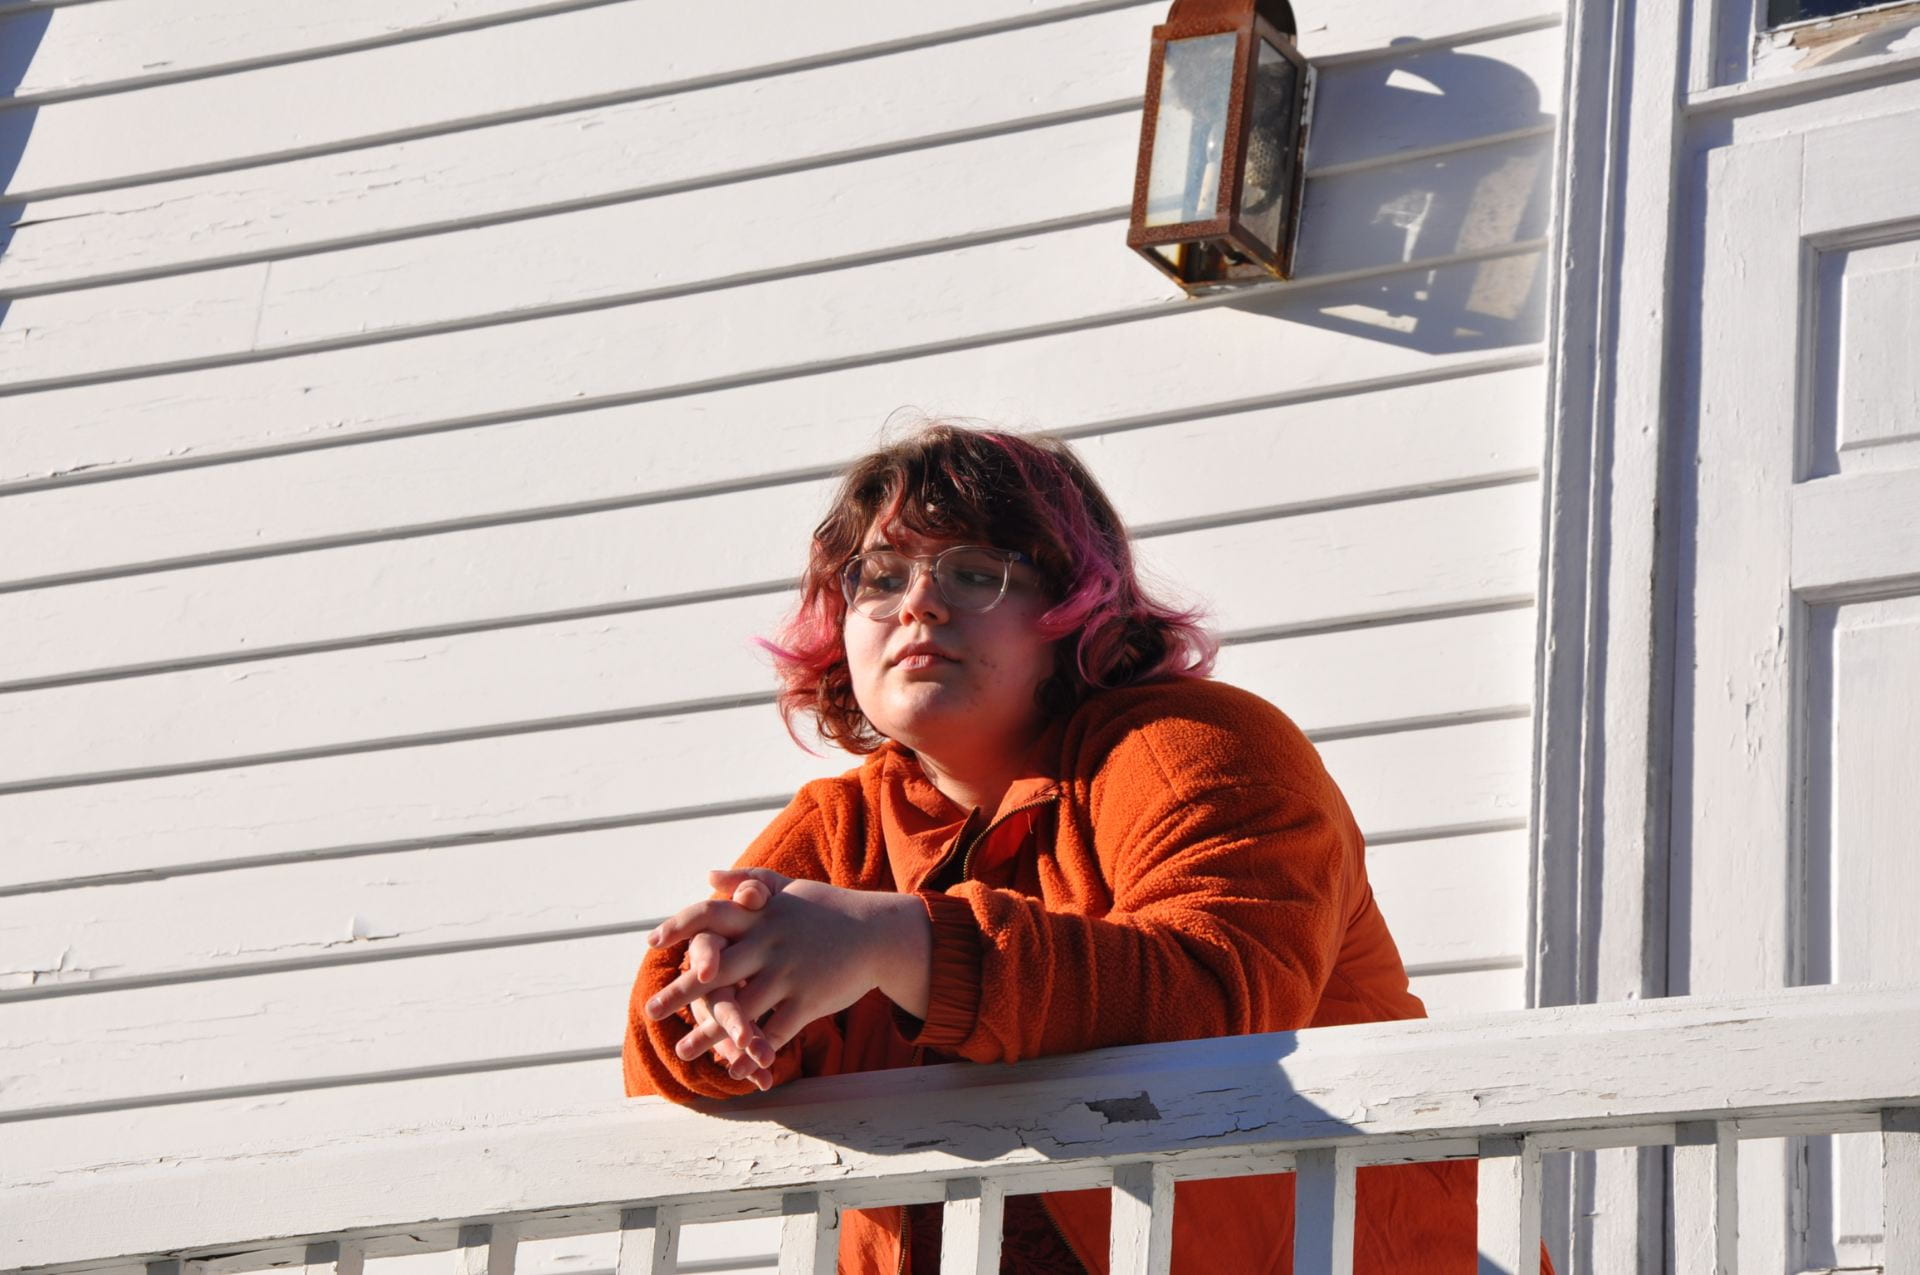 Image of Lilah Kamins leaning against a railing.